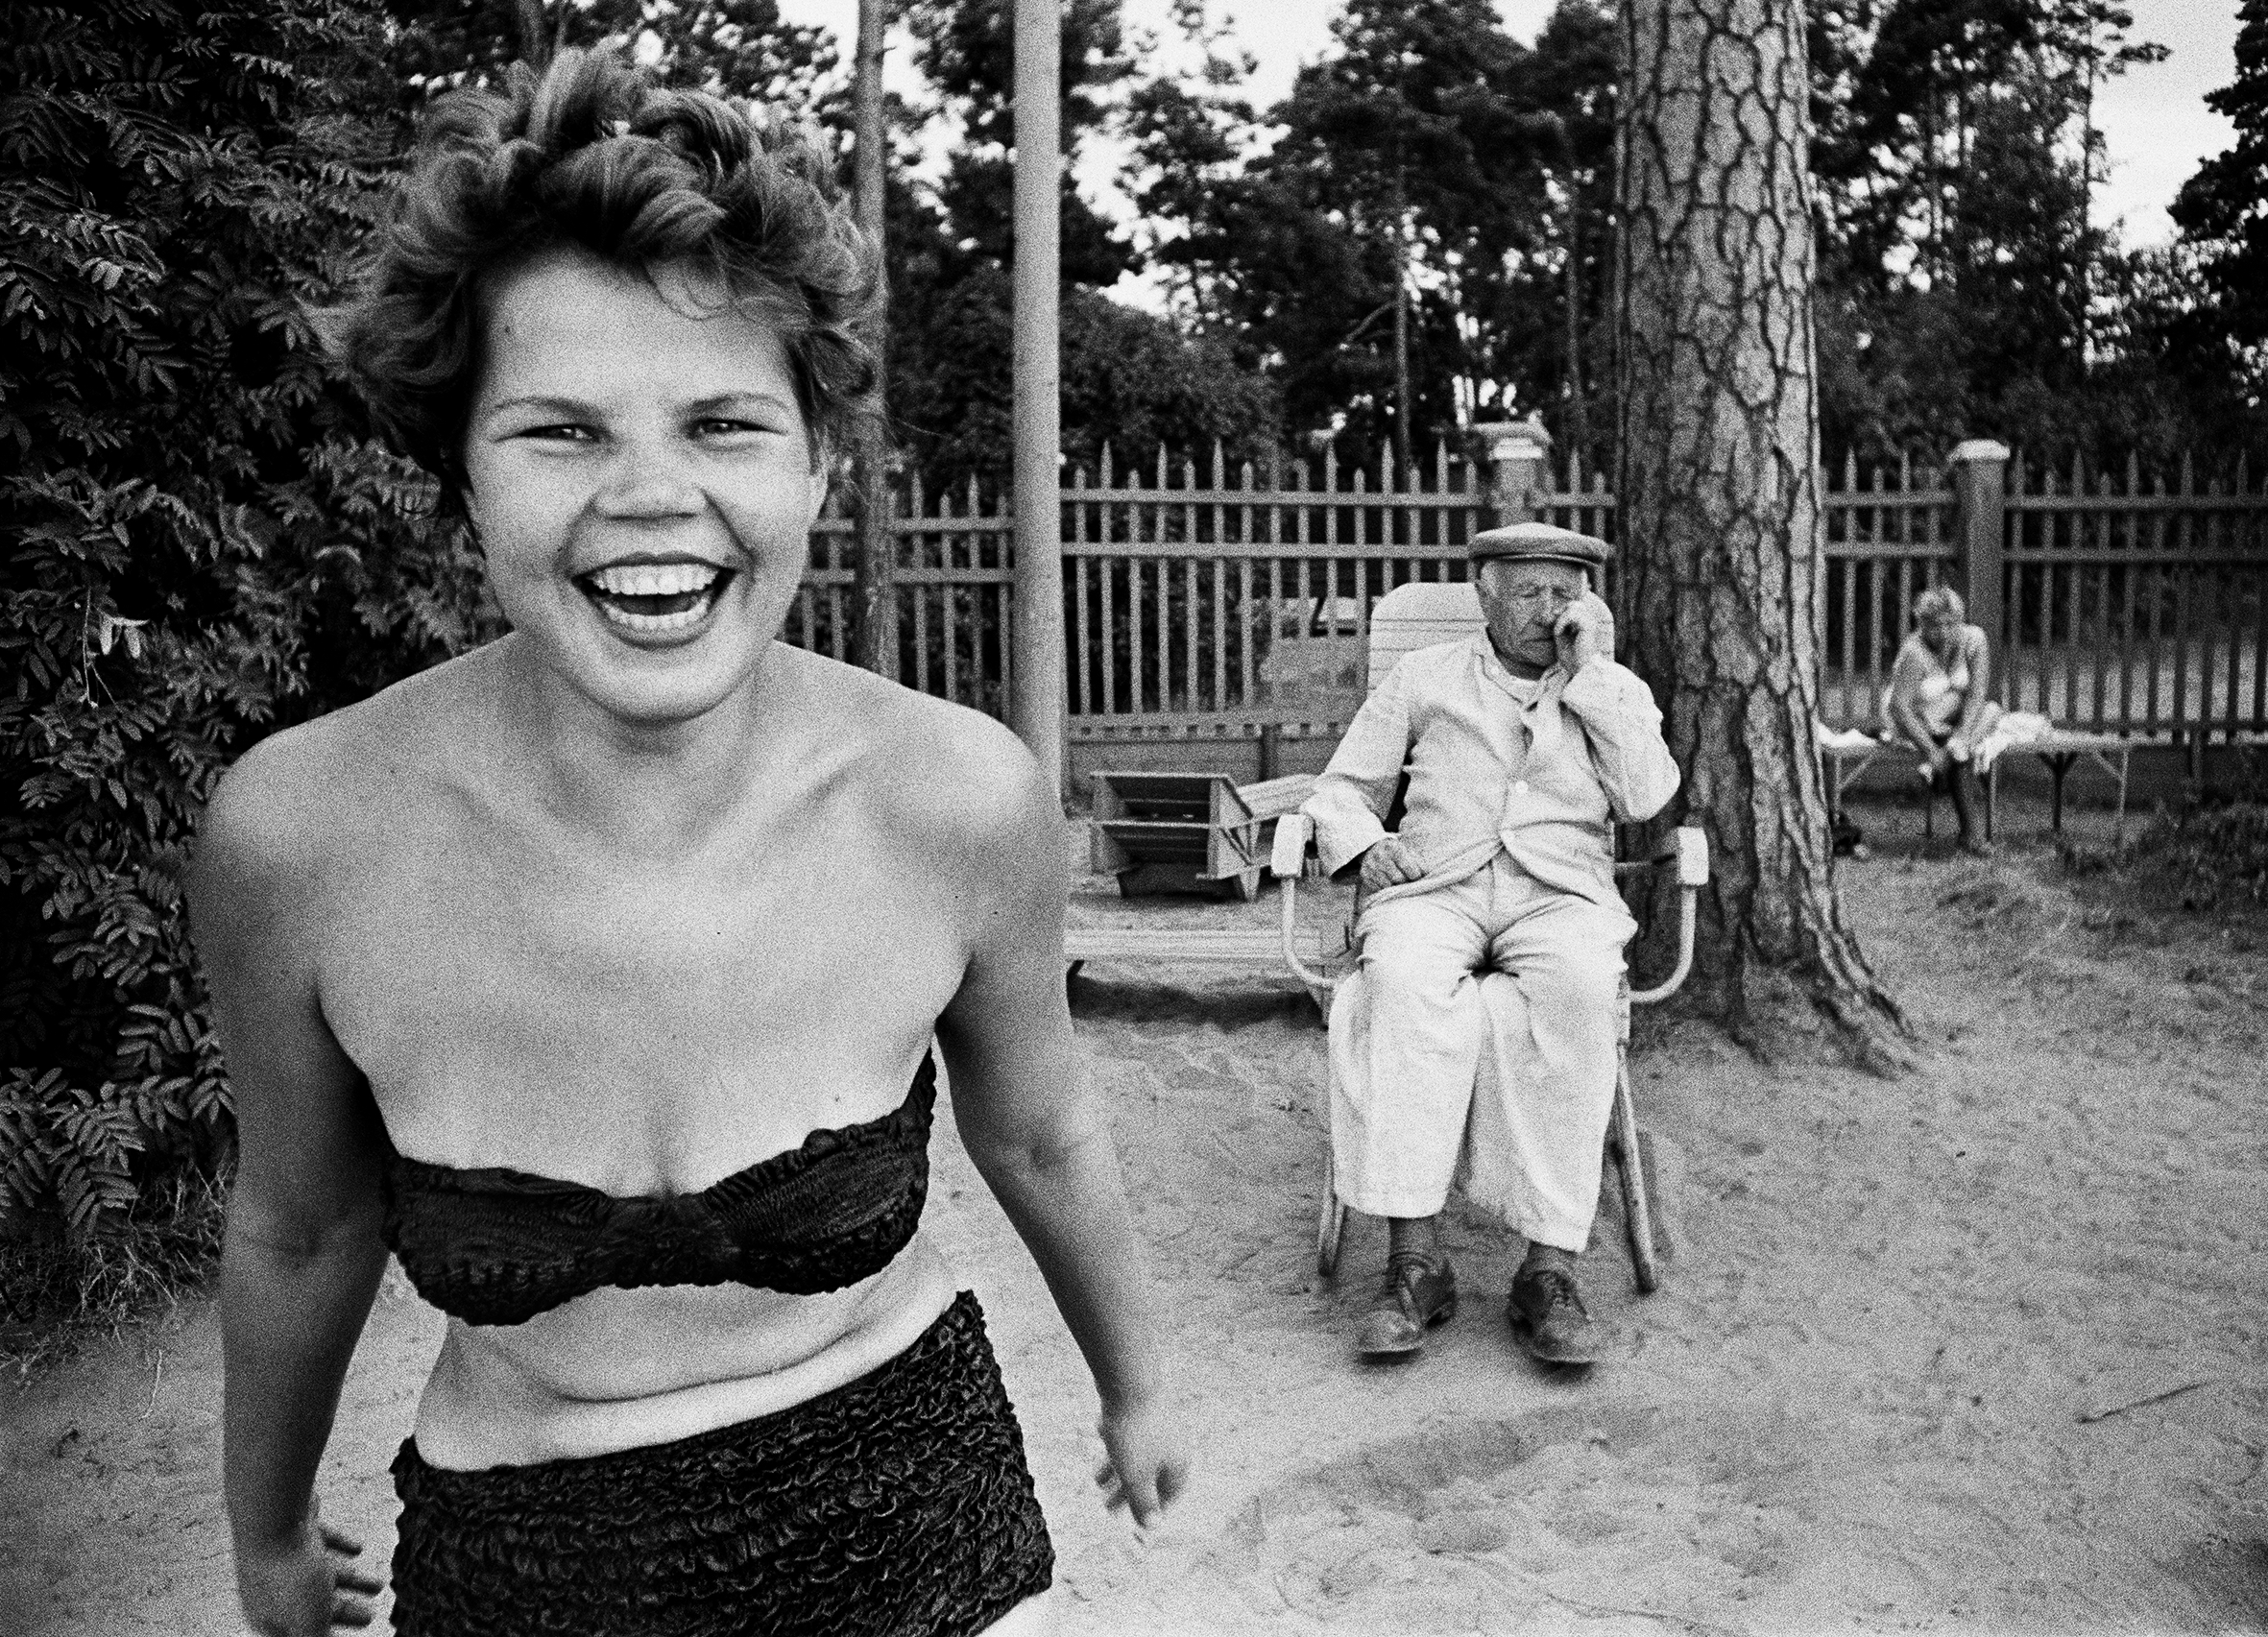 Black-and-white photo of a woman in a bikini outside laughing at the camera whilst an old man sleeps behind her